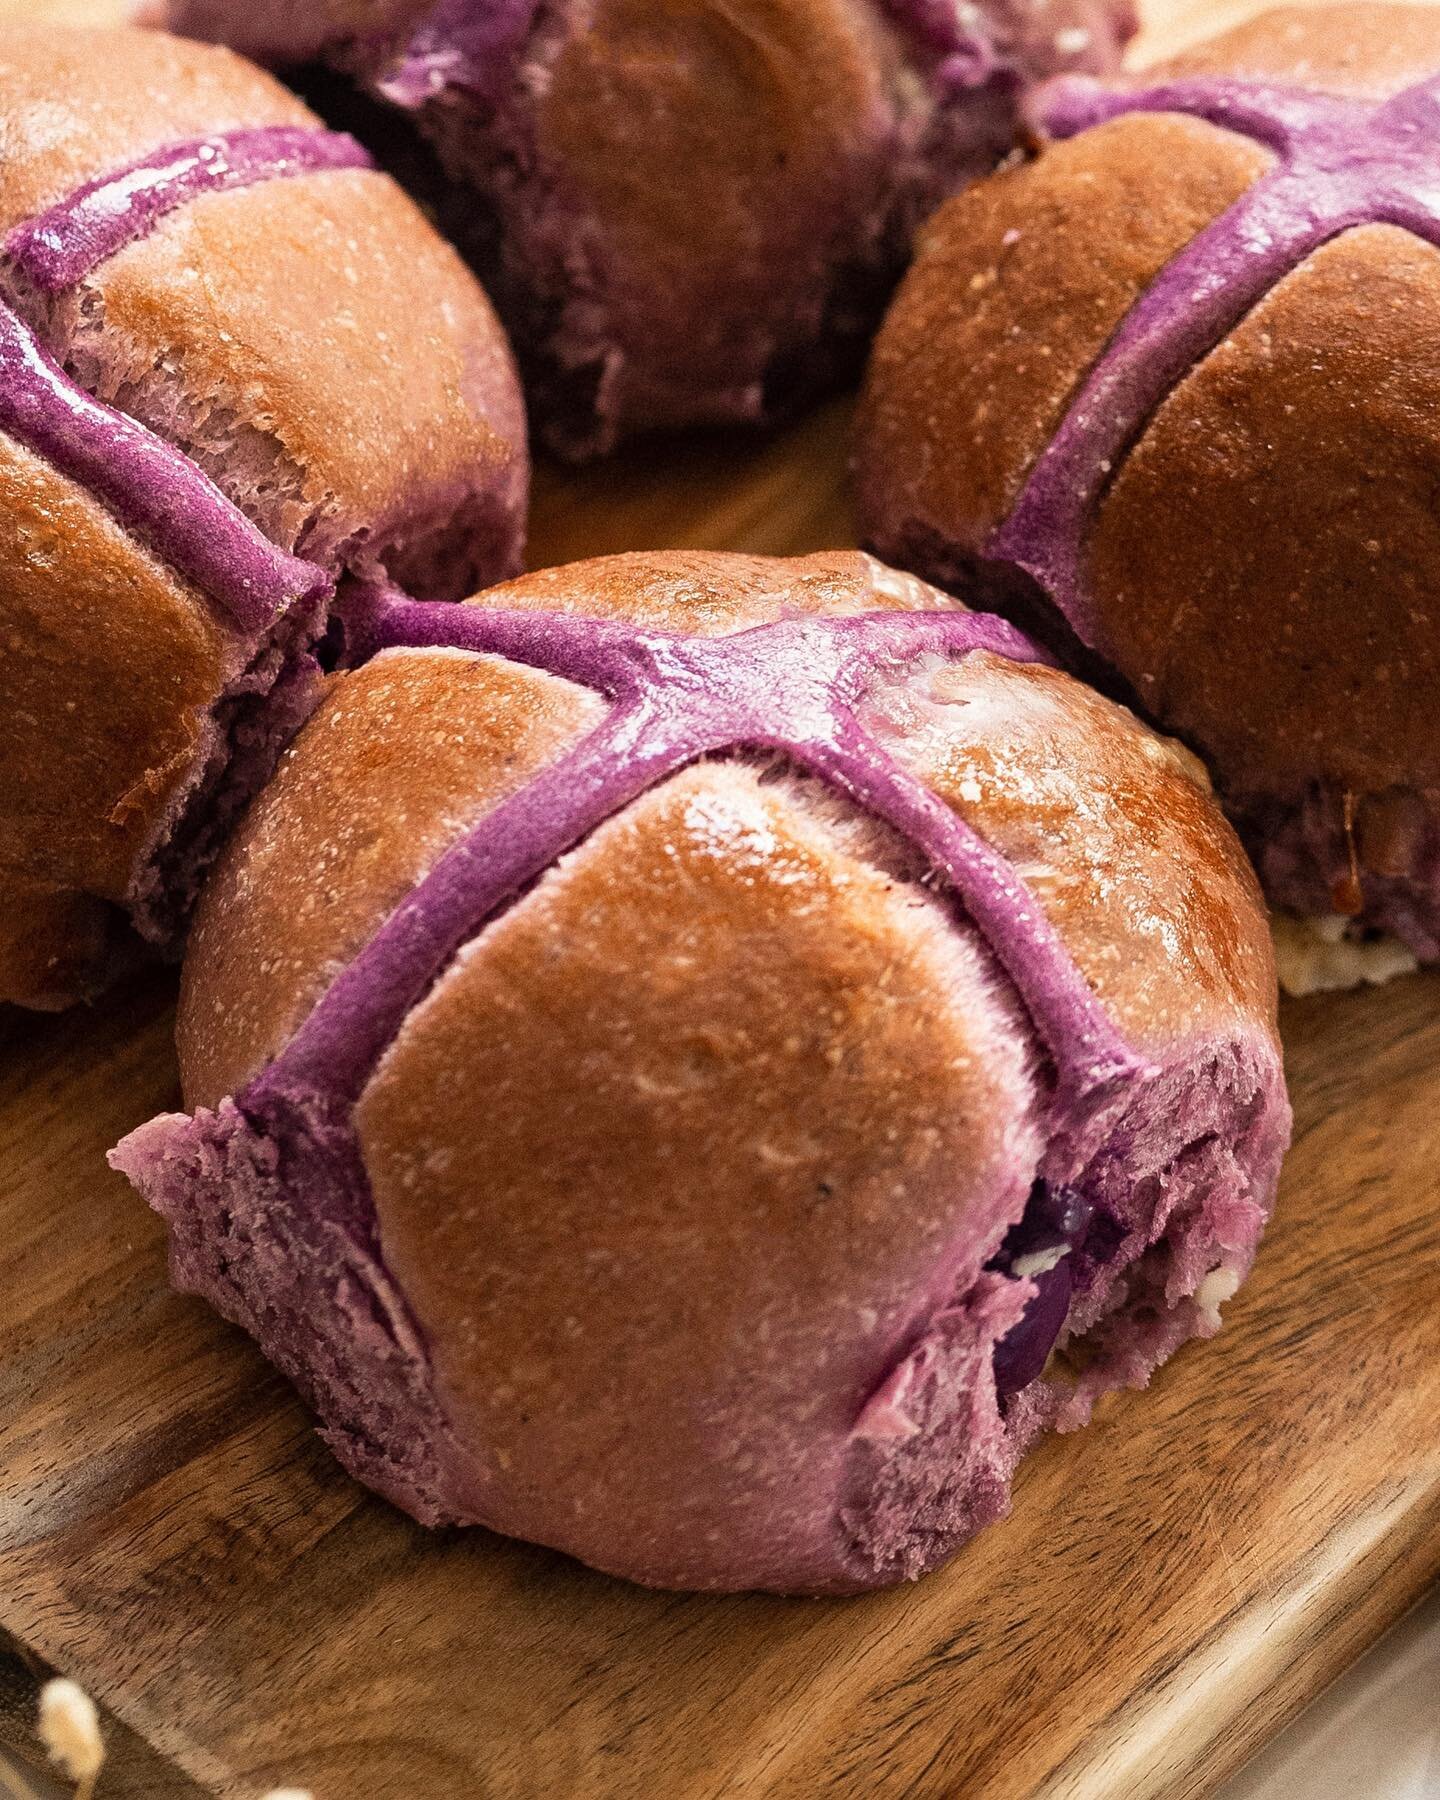 Happy Easter from Pecks Road!

We&rsquo;ve got Ube HXB&rsquo;s comin&rsquo; fresh out the oven at the cafe today. 

Infused with white chocolate, filled with Ube pastry cream and glazed with sugar syrup. 

Available for walk-ins today and tomorrow on